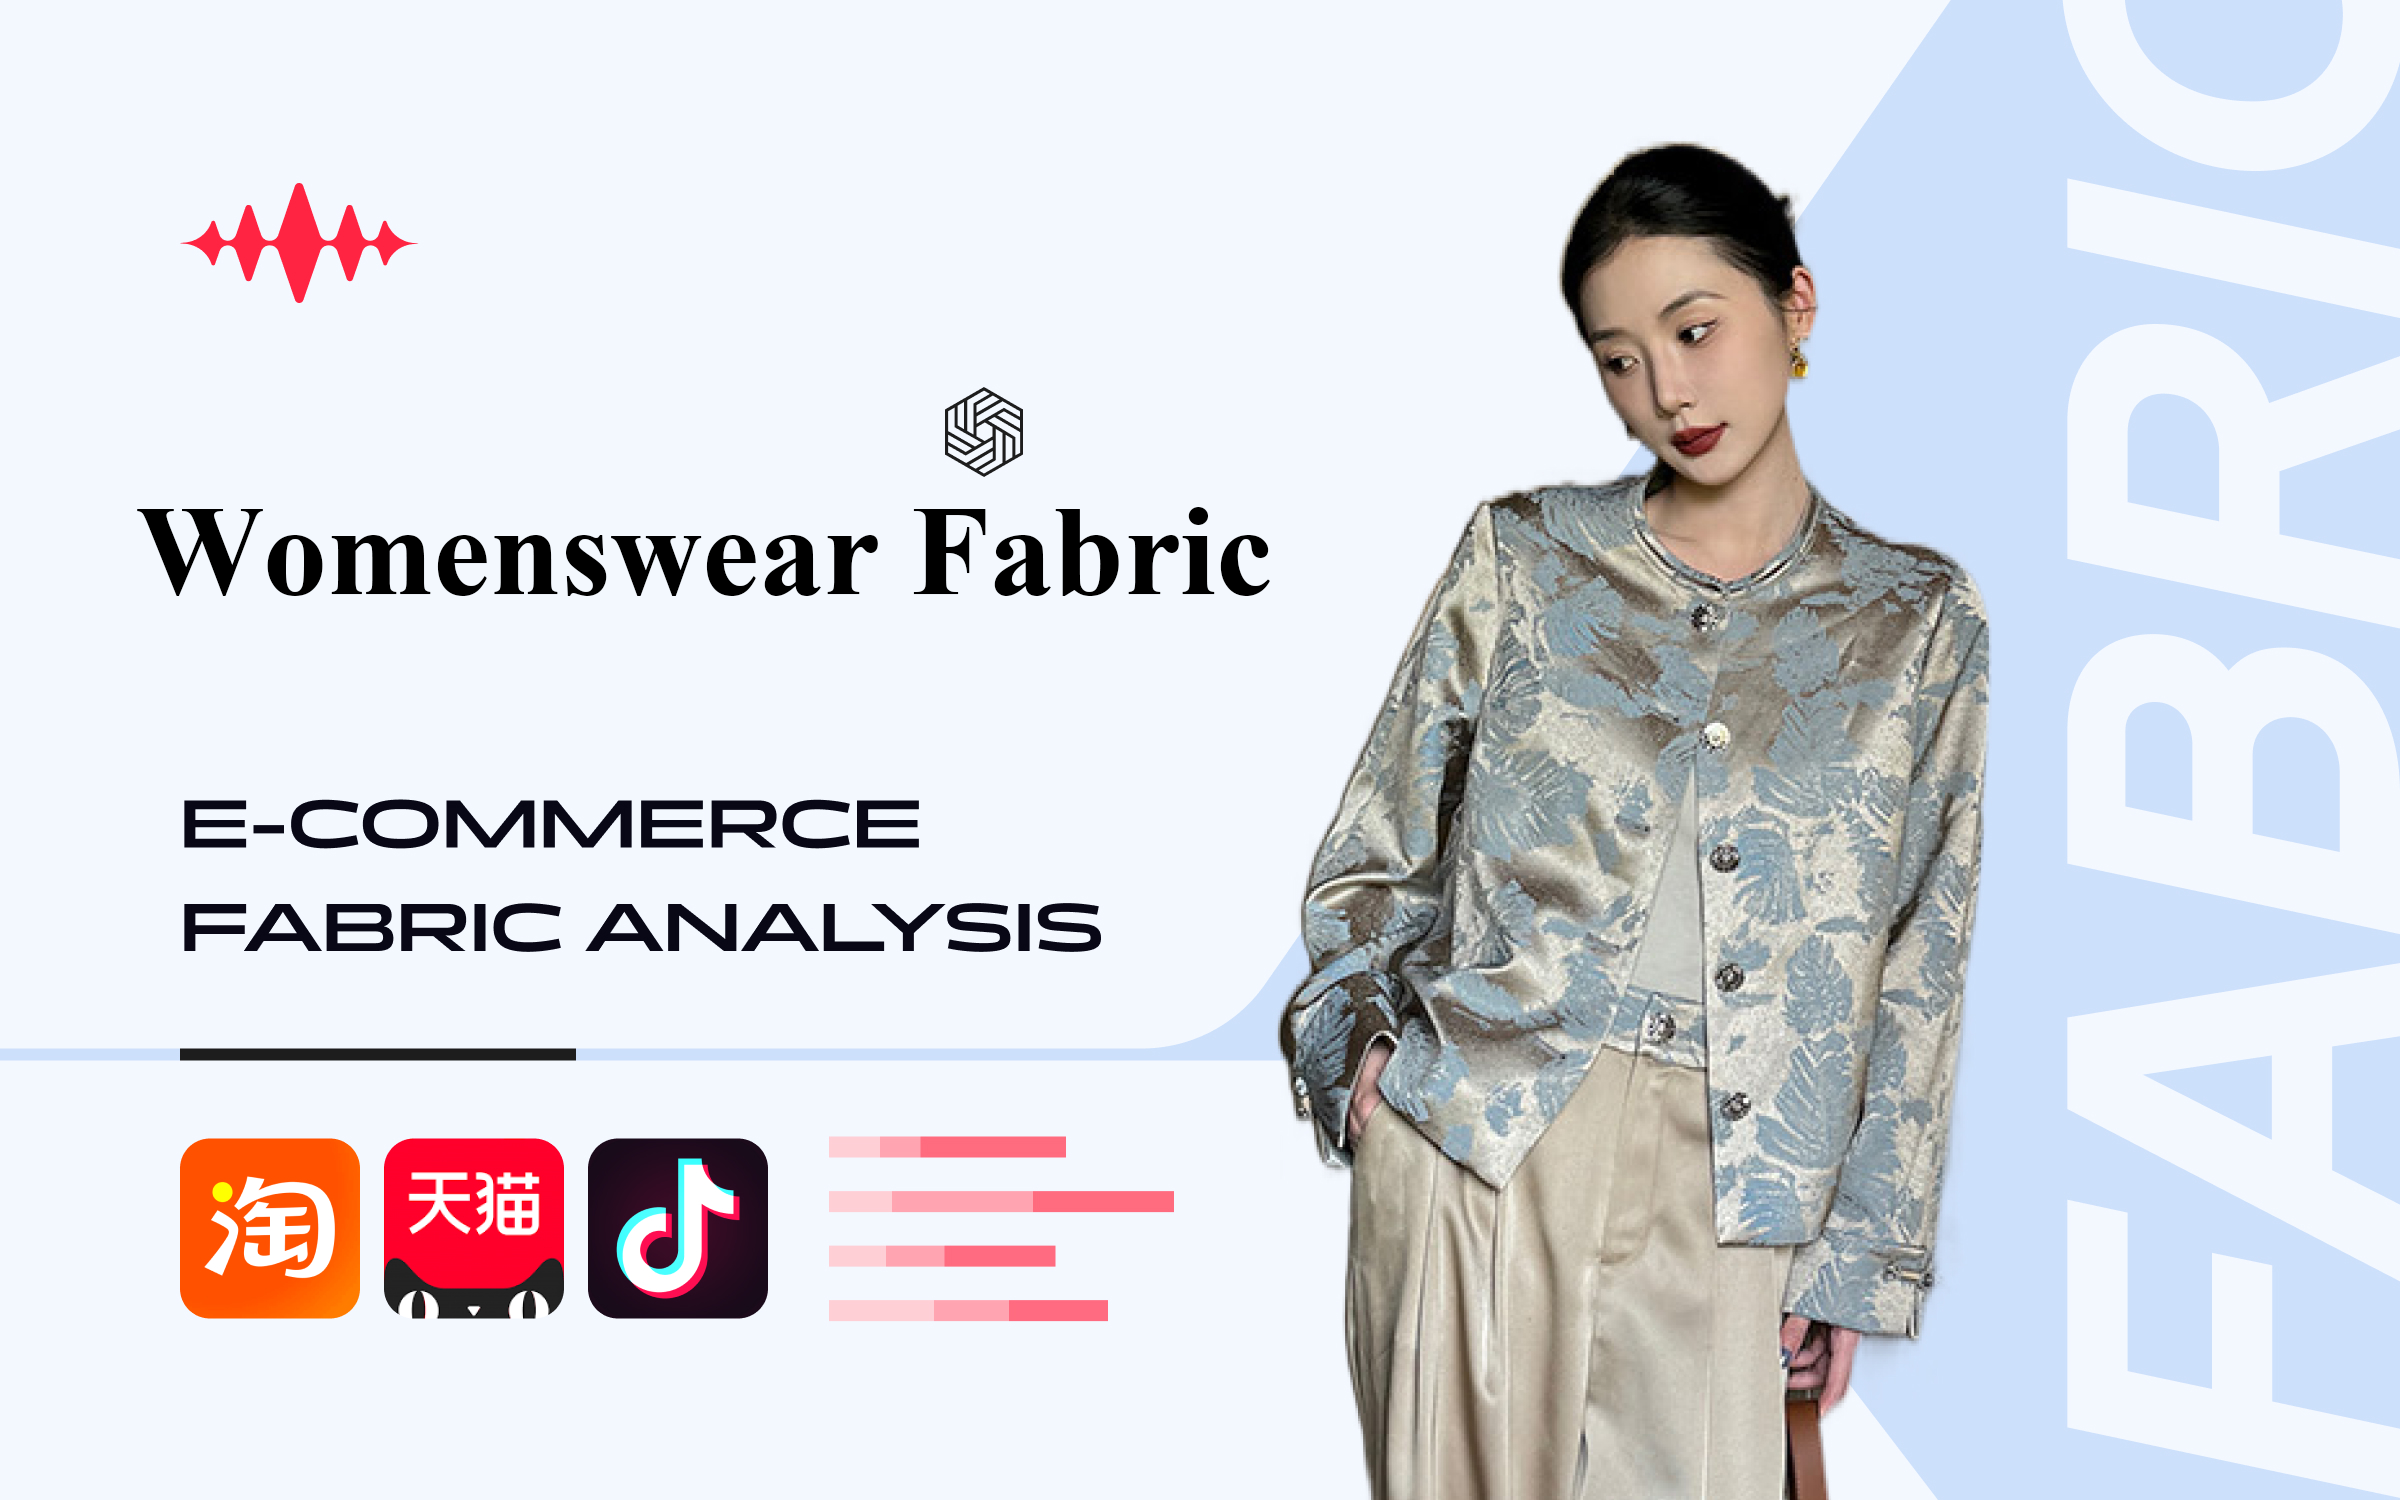 The Analysis of Popular Fabrics in Womenswear E-Commerce in March